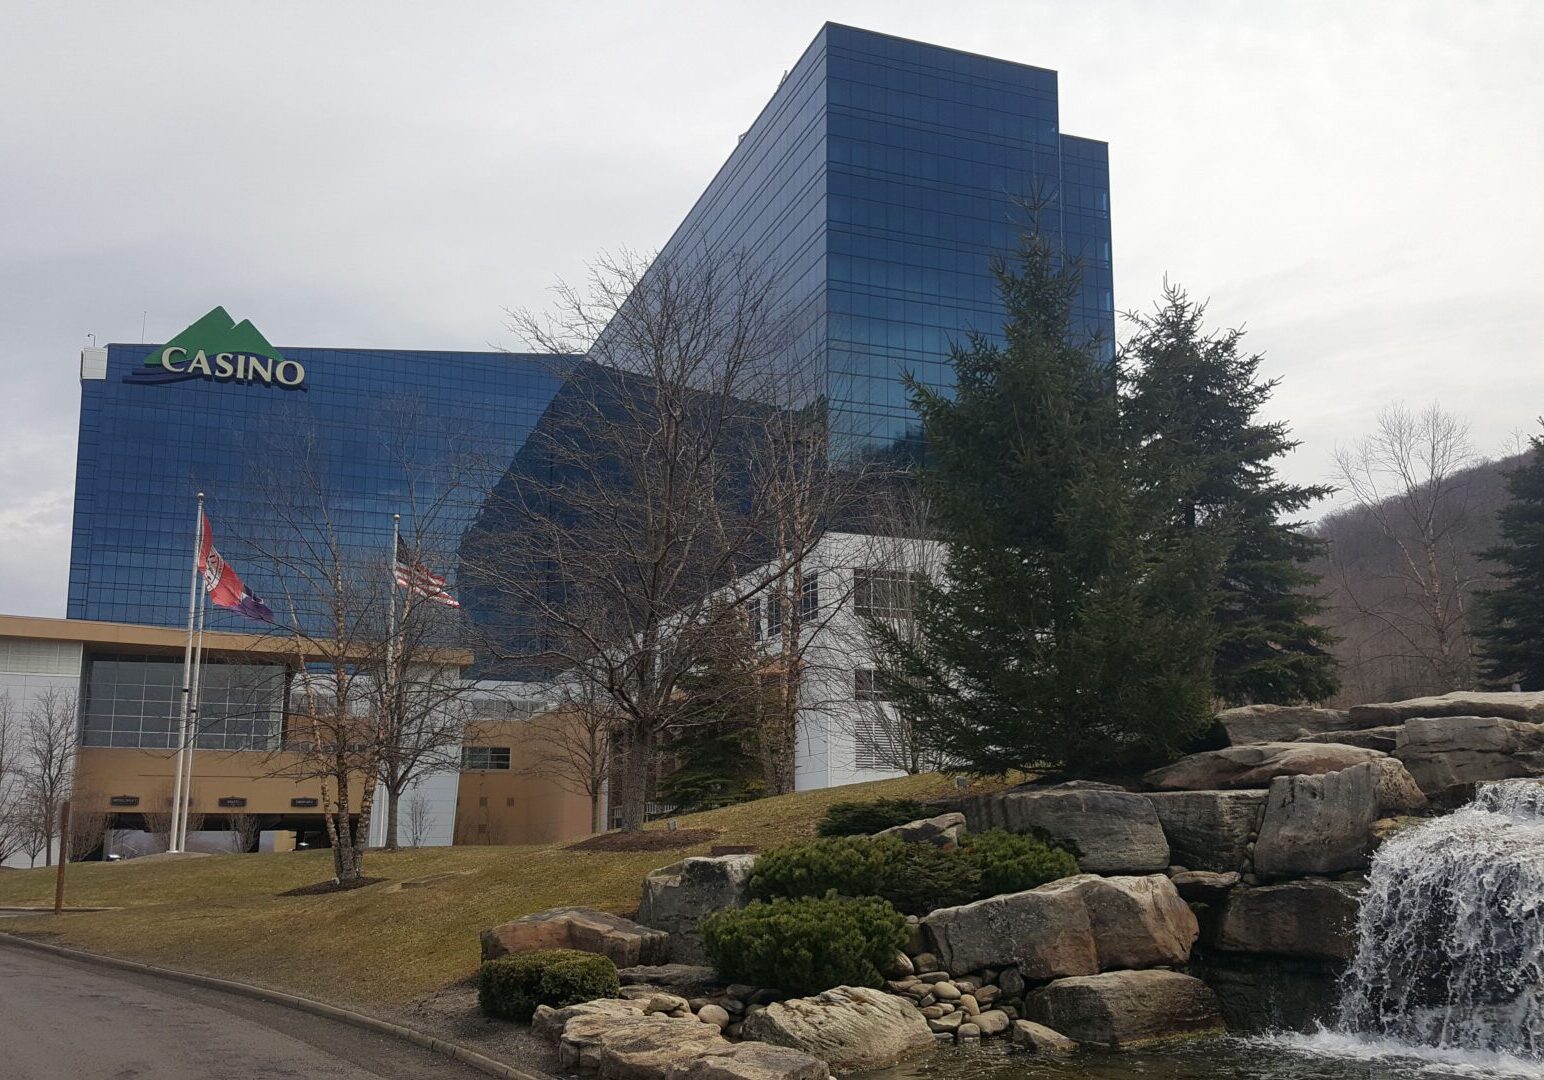 Modern casino building with a cascading artificial waterfall in the foreground.